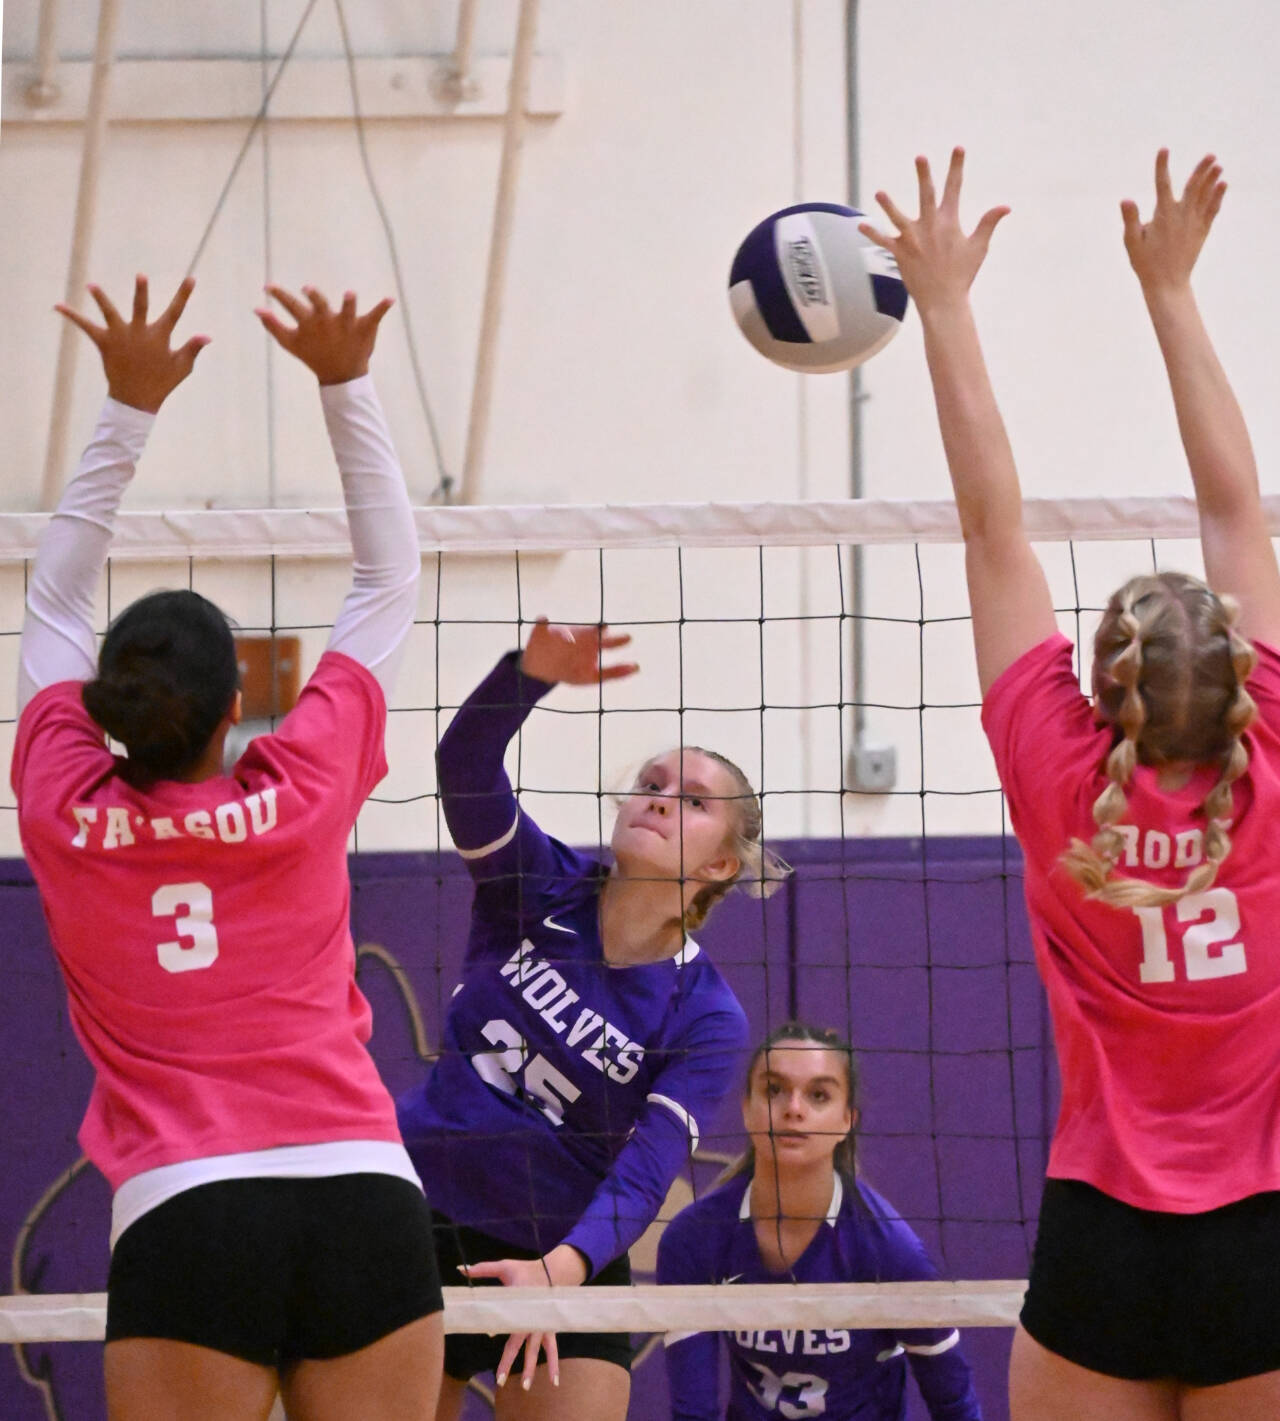 Sequim Gazette file photo by Michael Dashiell
With teammate Adrianna Stovall looking on, Sequim’s Jolene Vaara (25) looks to put a hit past Bremerton’s Lagituaiva Hale (3) and Helene Rode (12) in an Olympic League match on Oct. 24. Vaara and Stovall were named to the all-Olympic League first team last week.